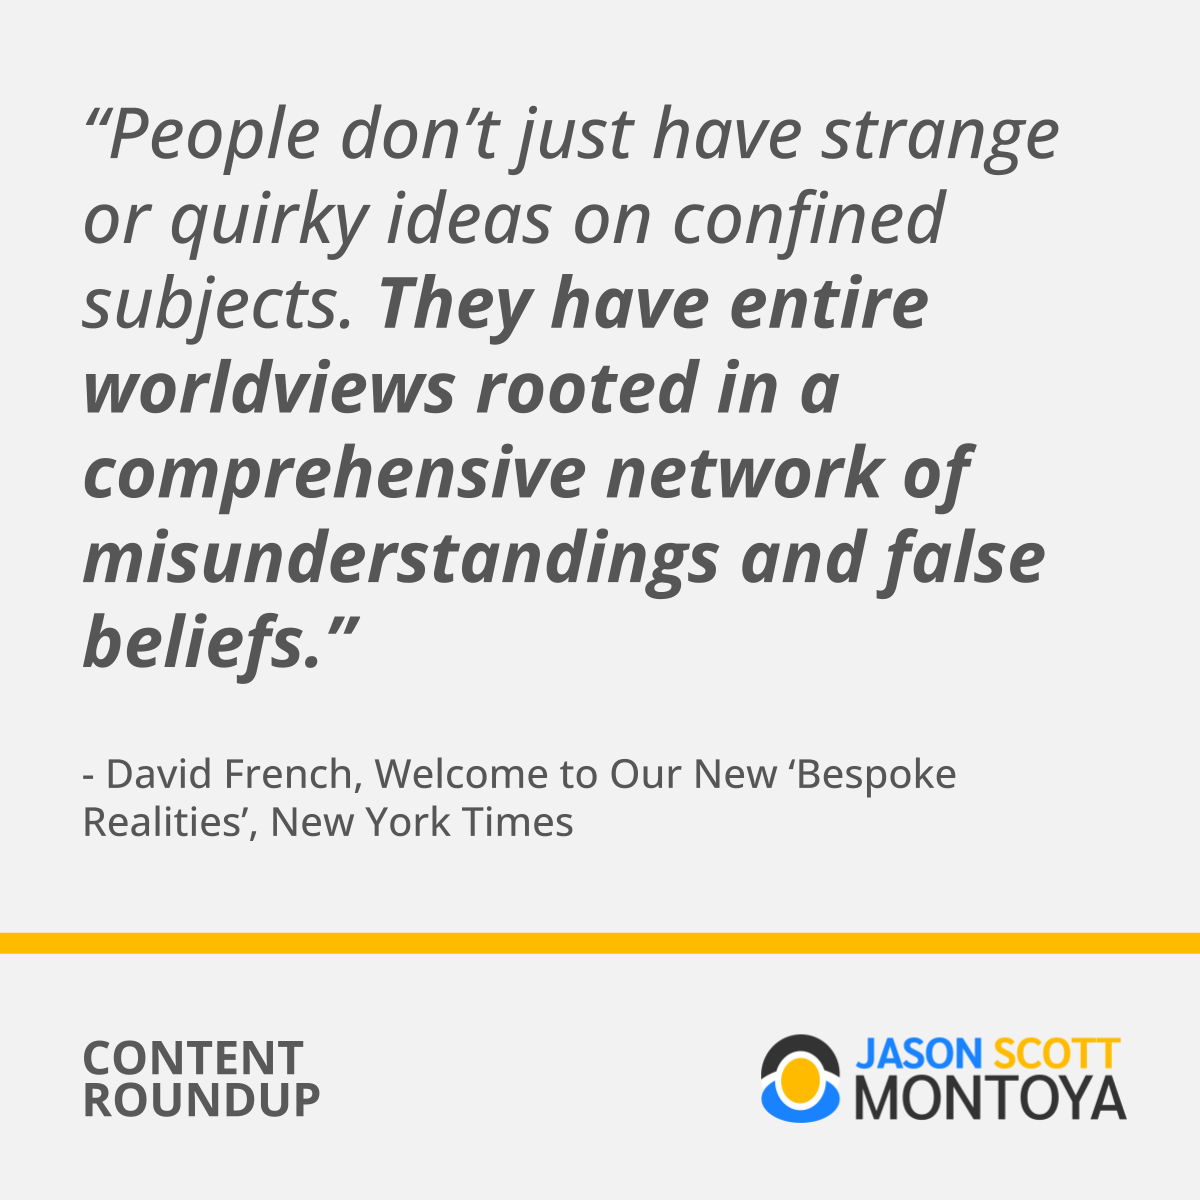 “People don’t just have strange or quirky ideas on confined subjects. They have entire worldviews rooted in a comprehensive network of misunderstandings and false beliefs.” - David French, Welcome to Our New ‘Bespoke Realities’